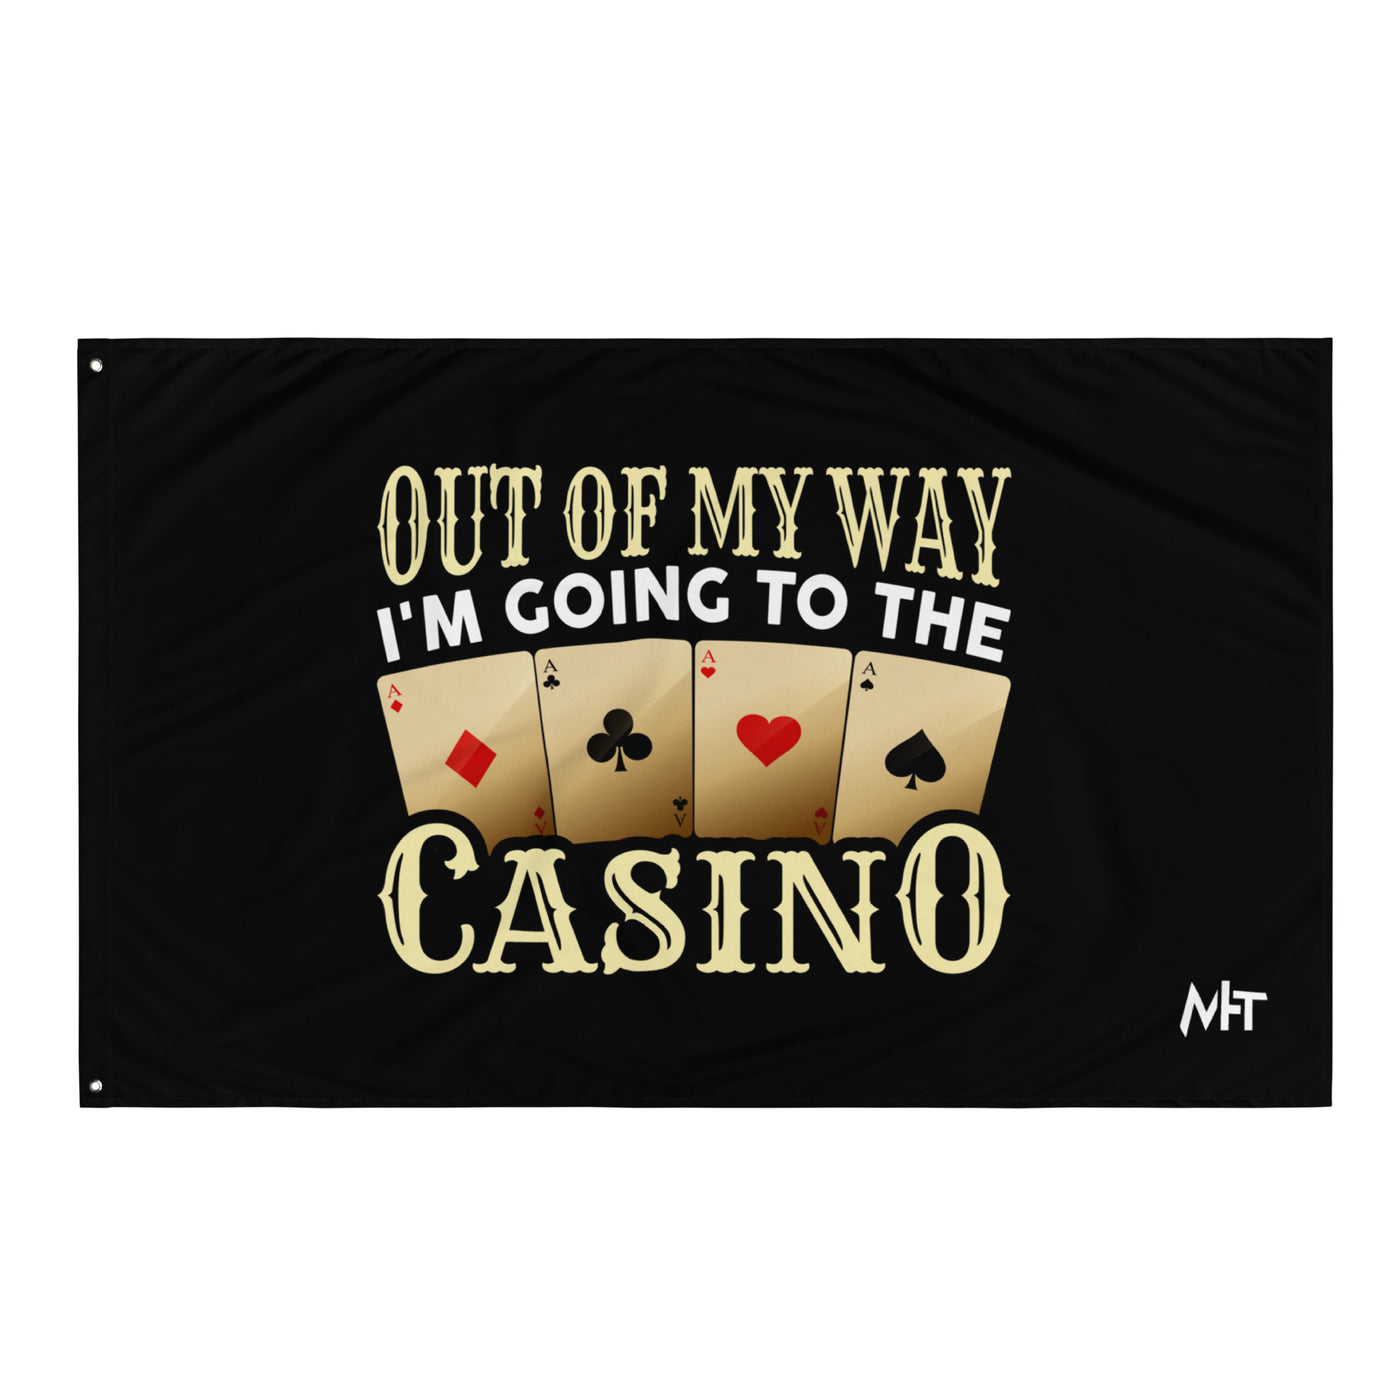 Out of My way; I am Going to the Casino - Flag